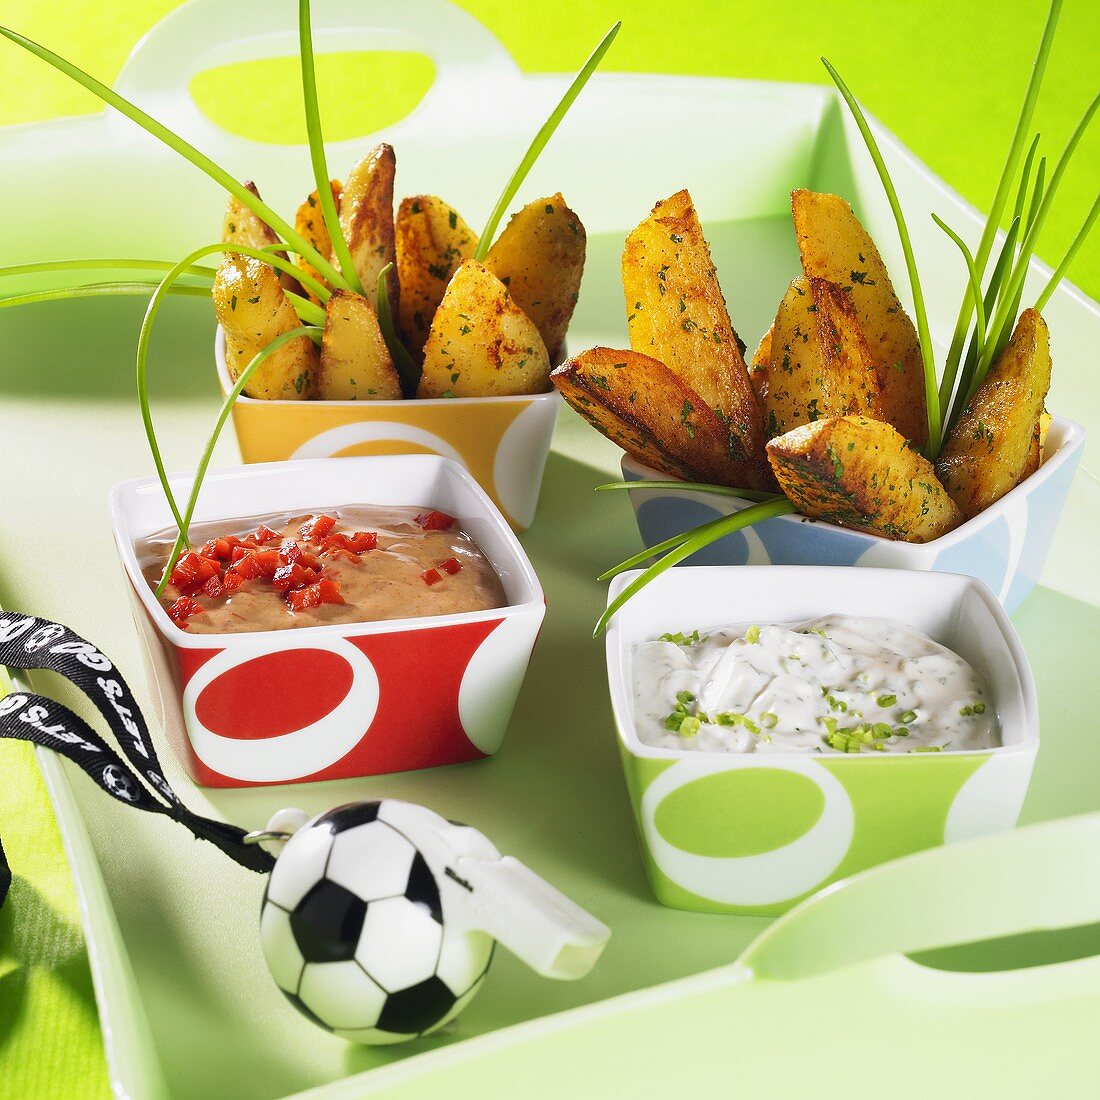 Potato wedges with dips and football